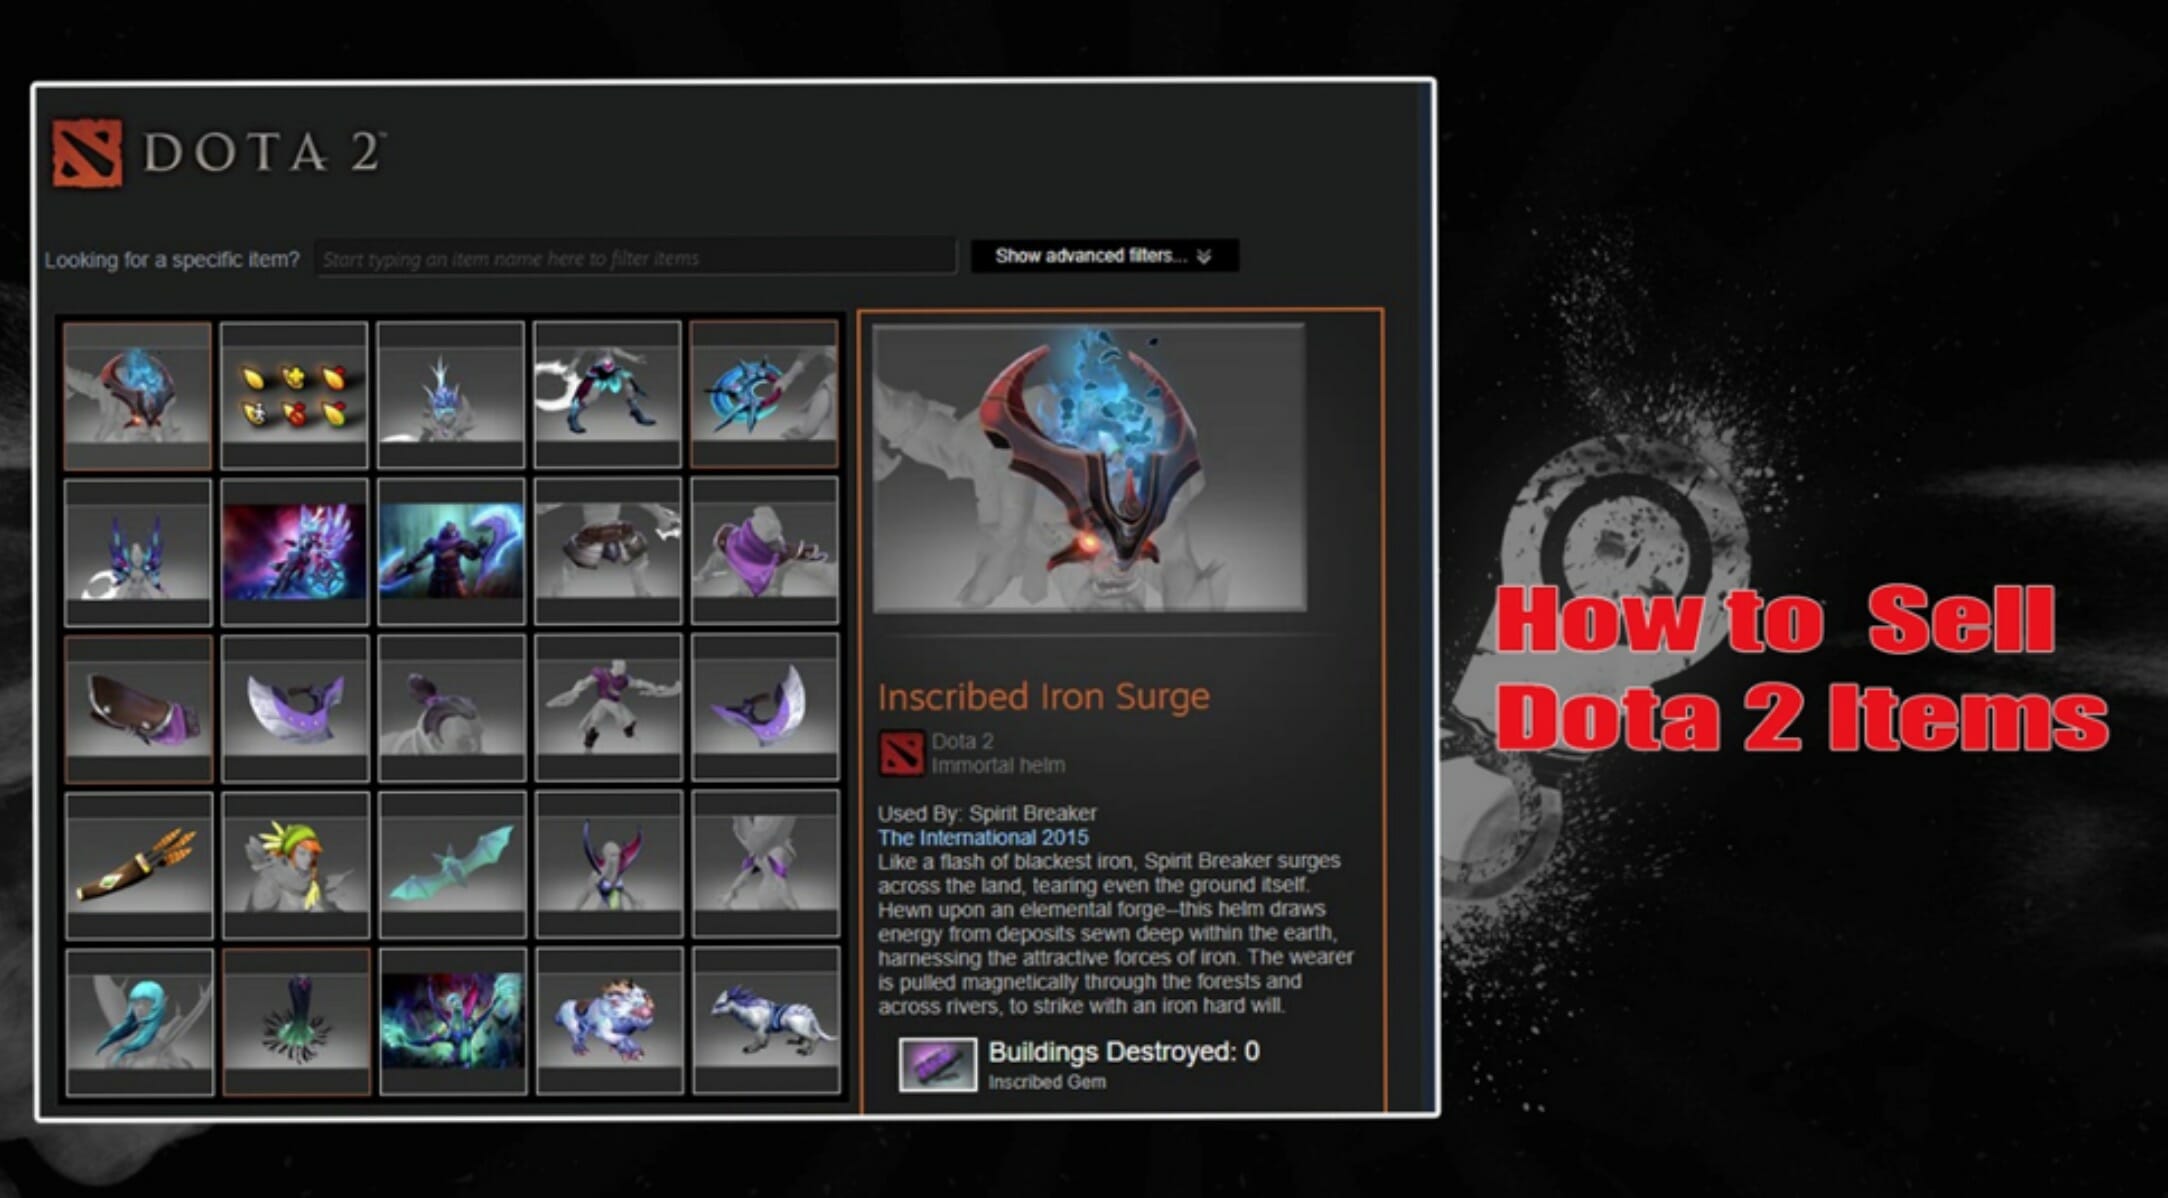 How to Sell Dota 2 Items